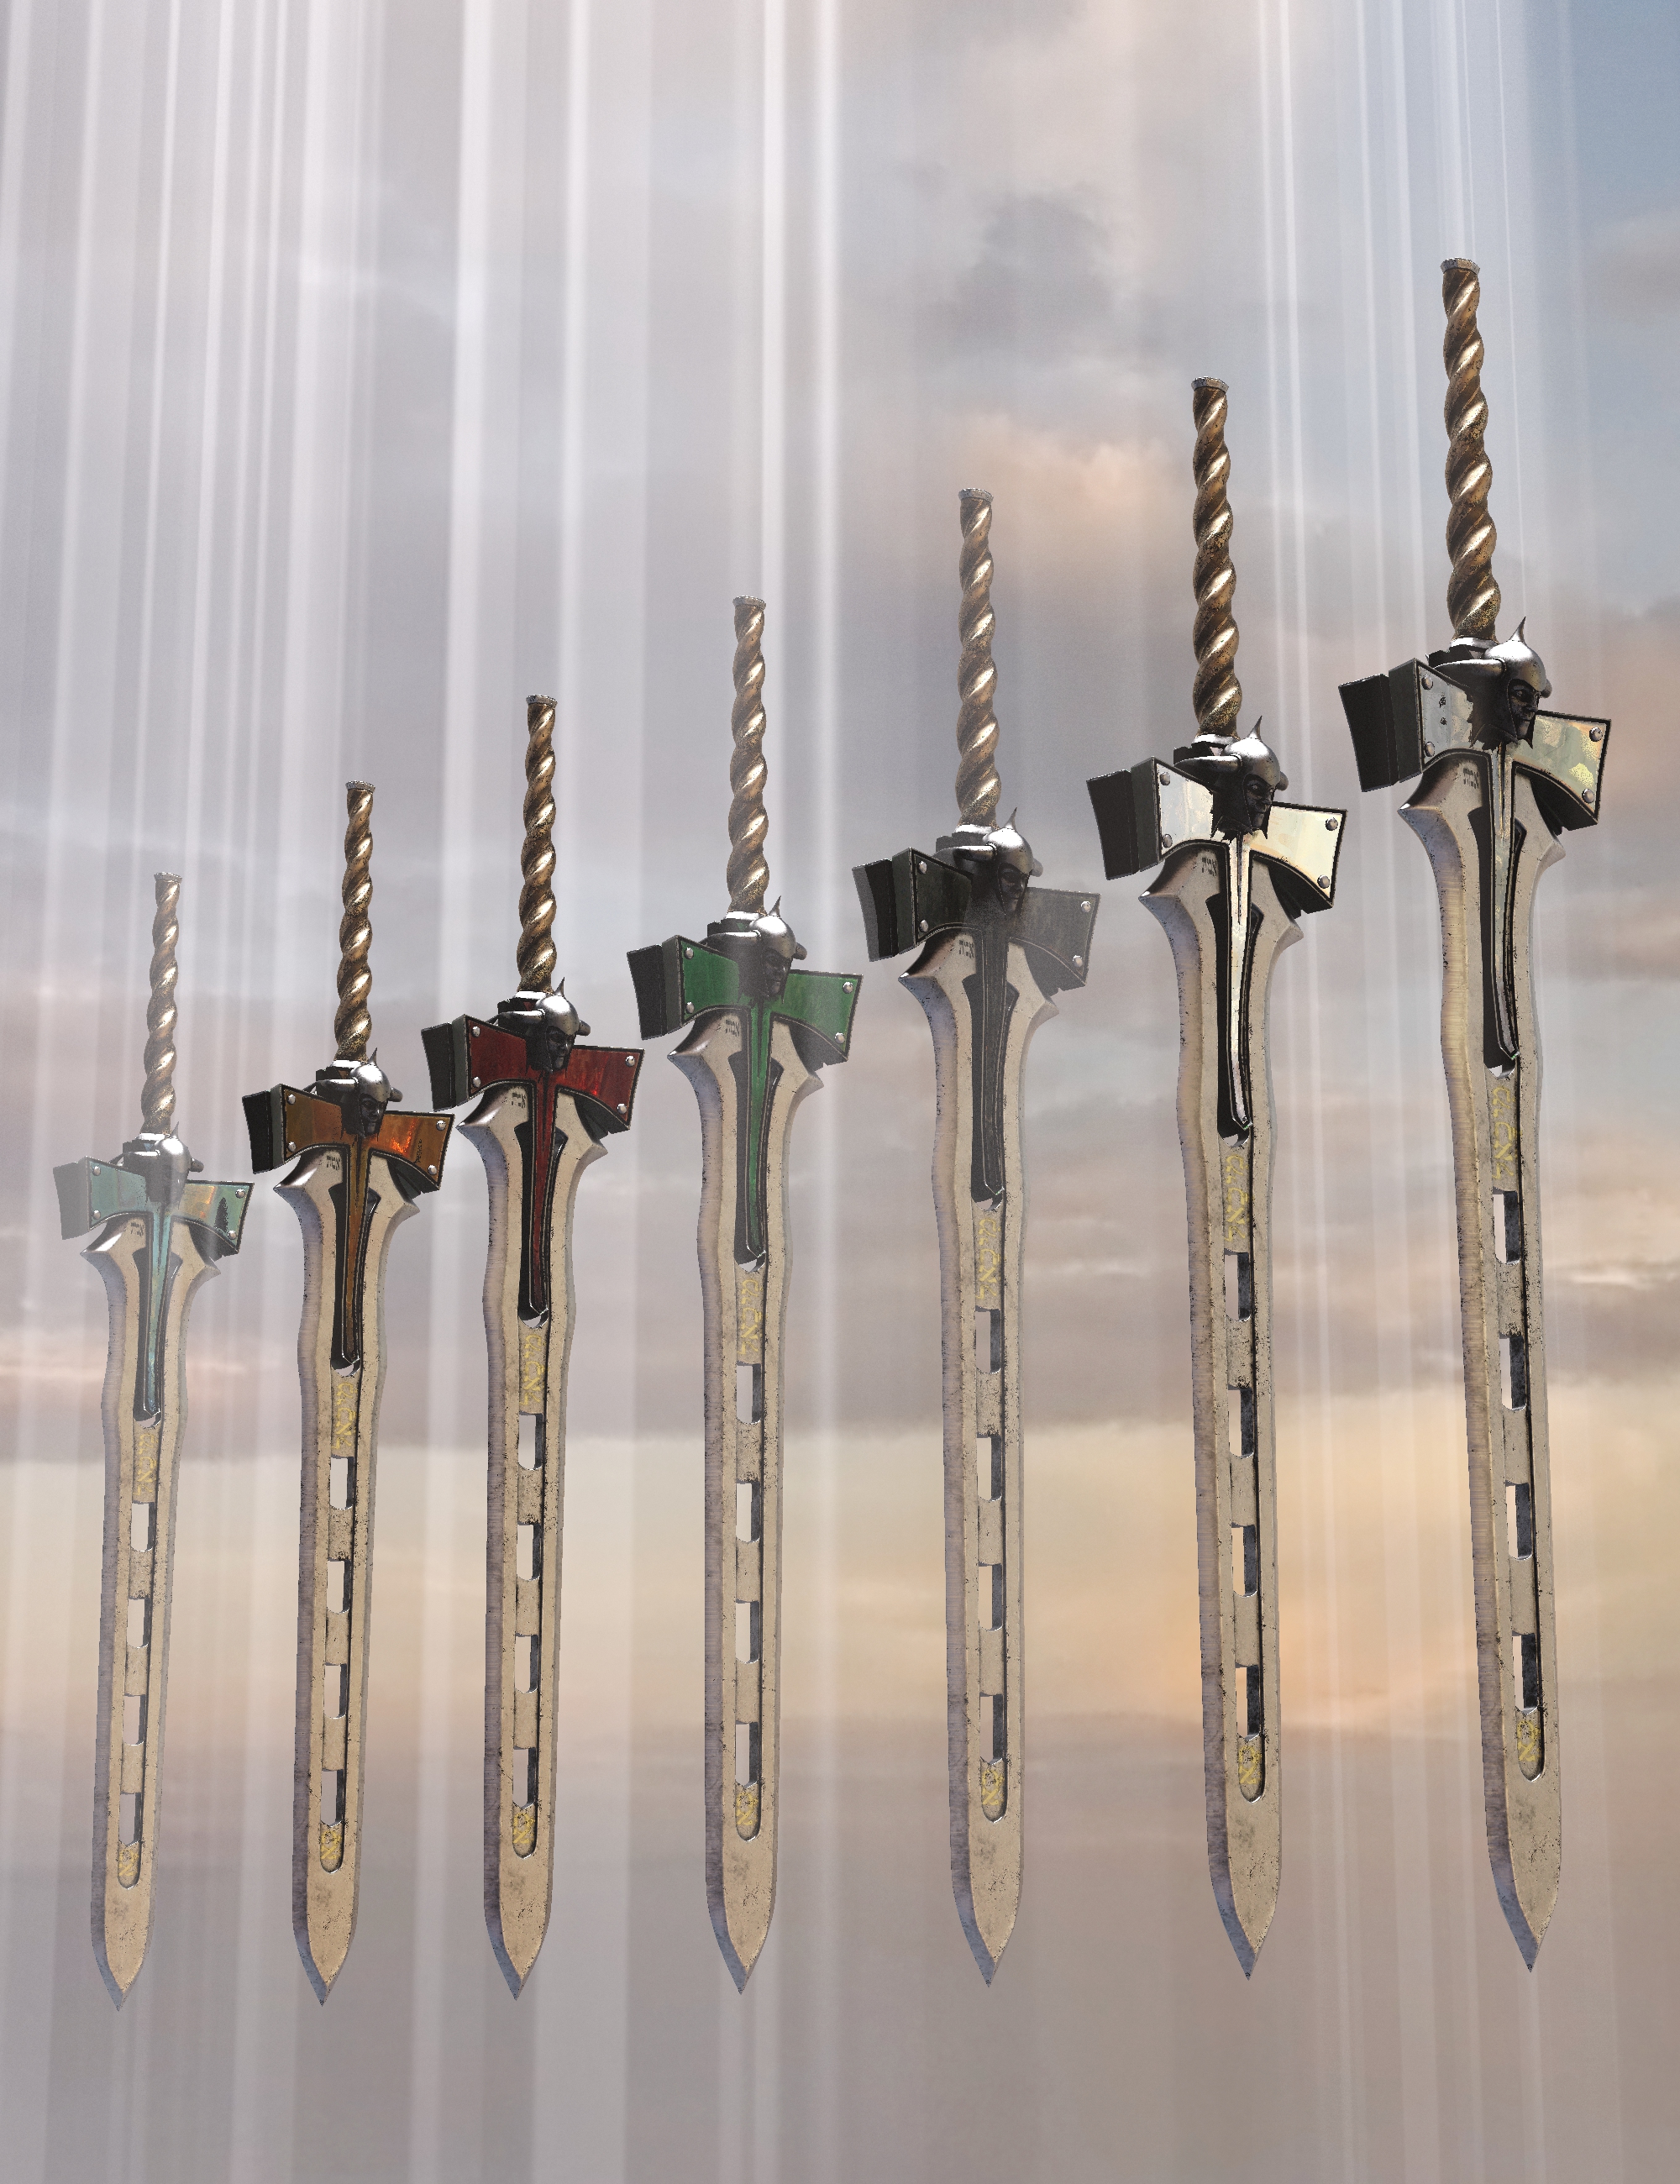 Bellum Animis 2 Weapons Collection by: Britech, 3D Models by Daz 3D